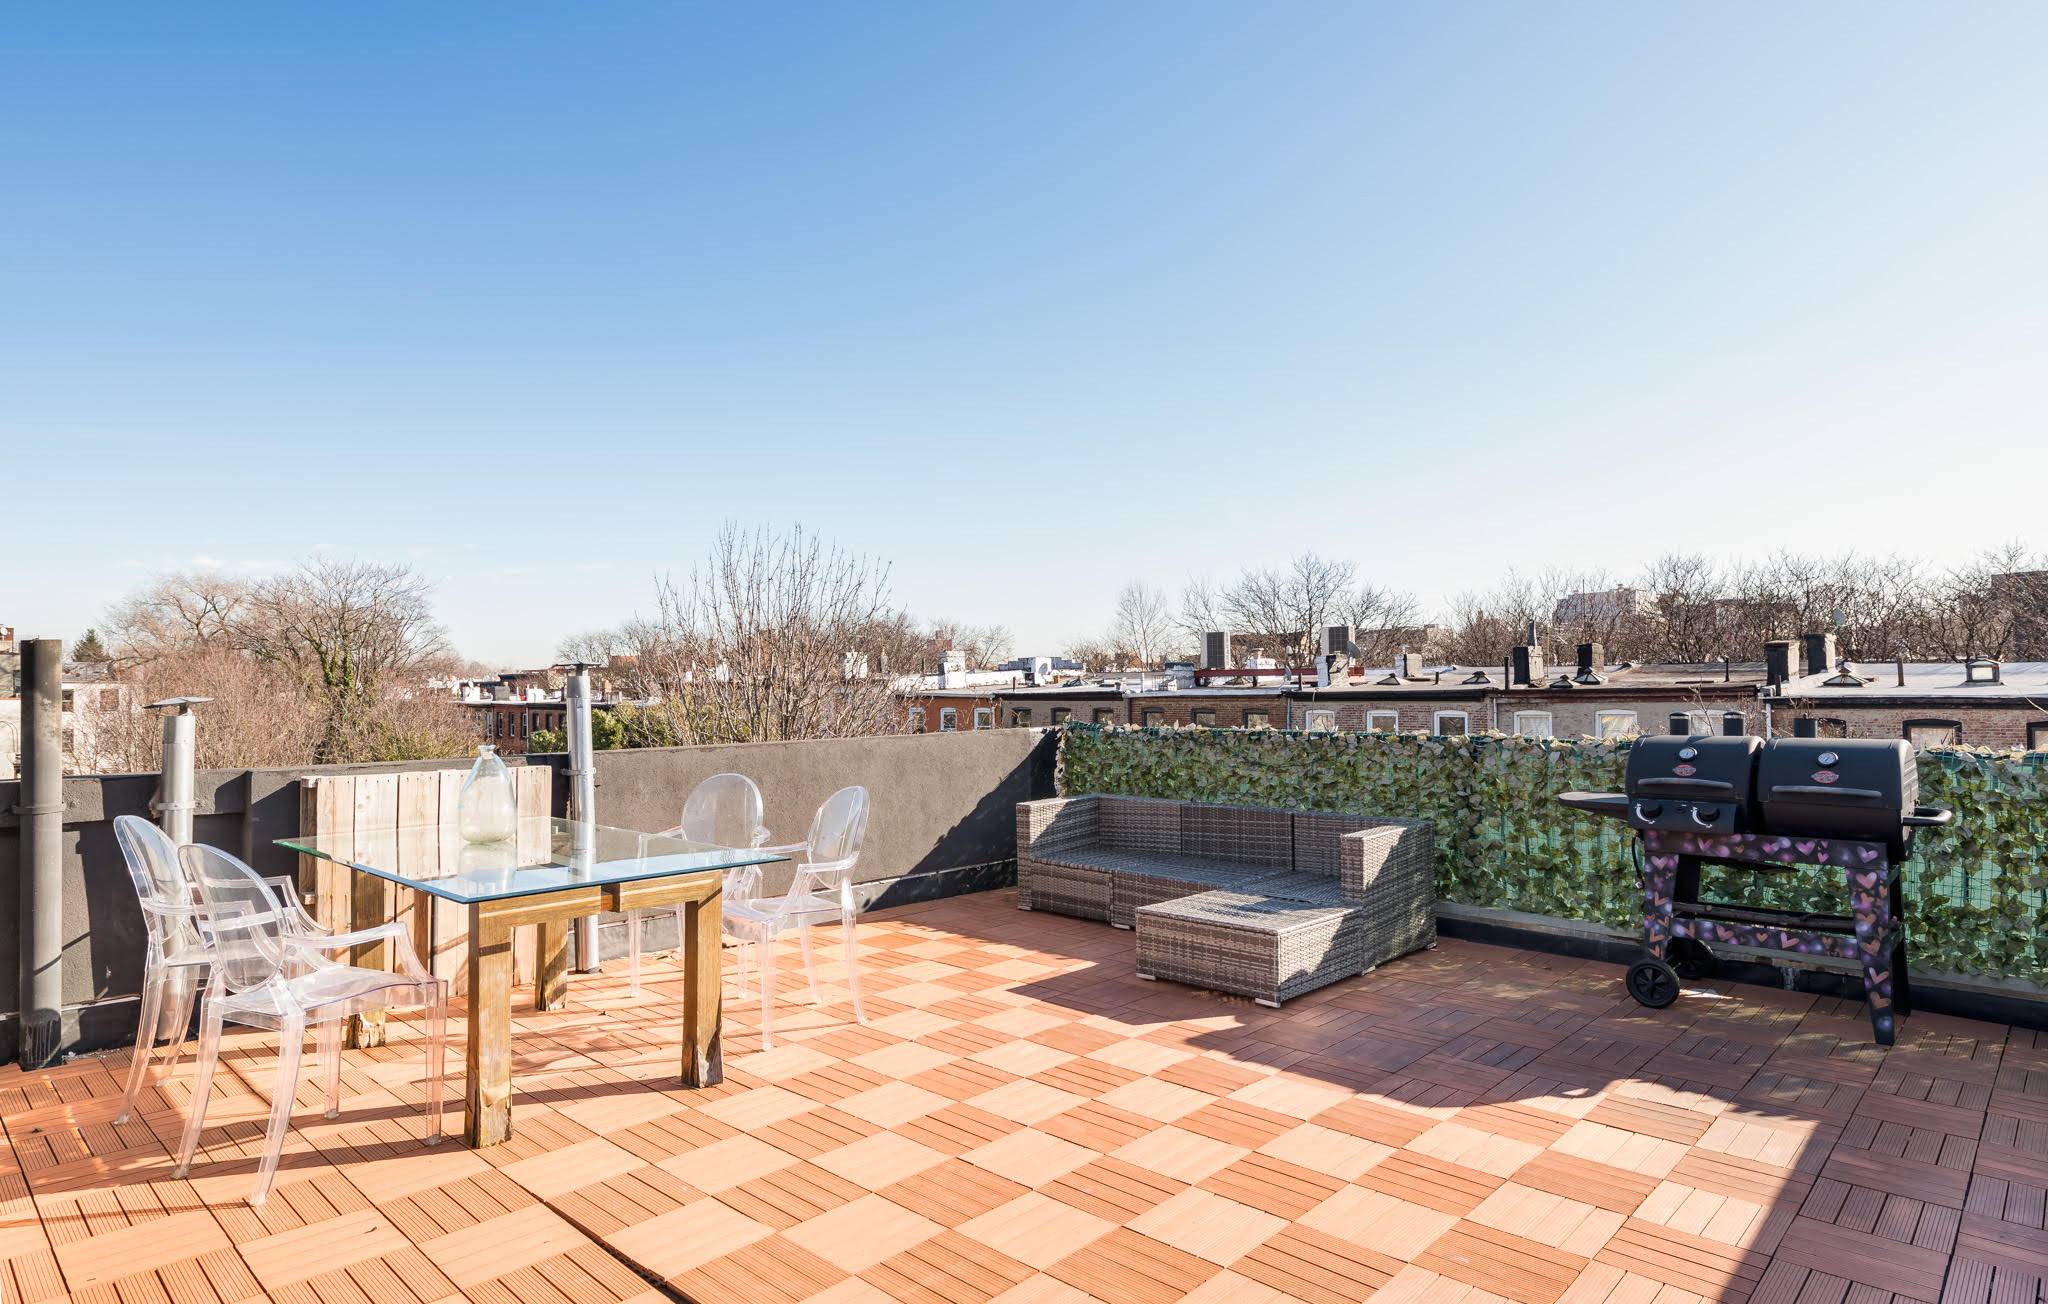 This very sunny true 2 bedroom, 2 bath penthouse apartment is a cut above the rest with renovated kitchen and baths and a private roof deck with city views.